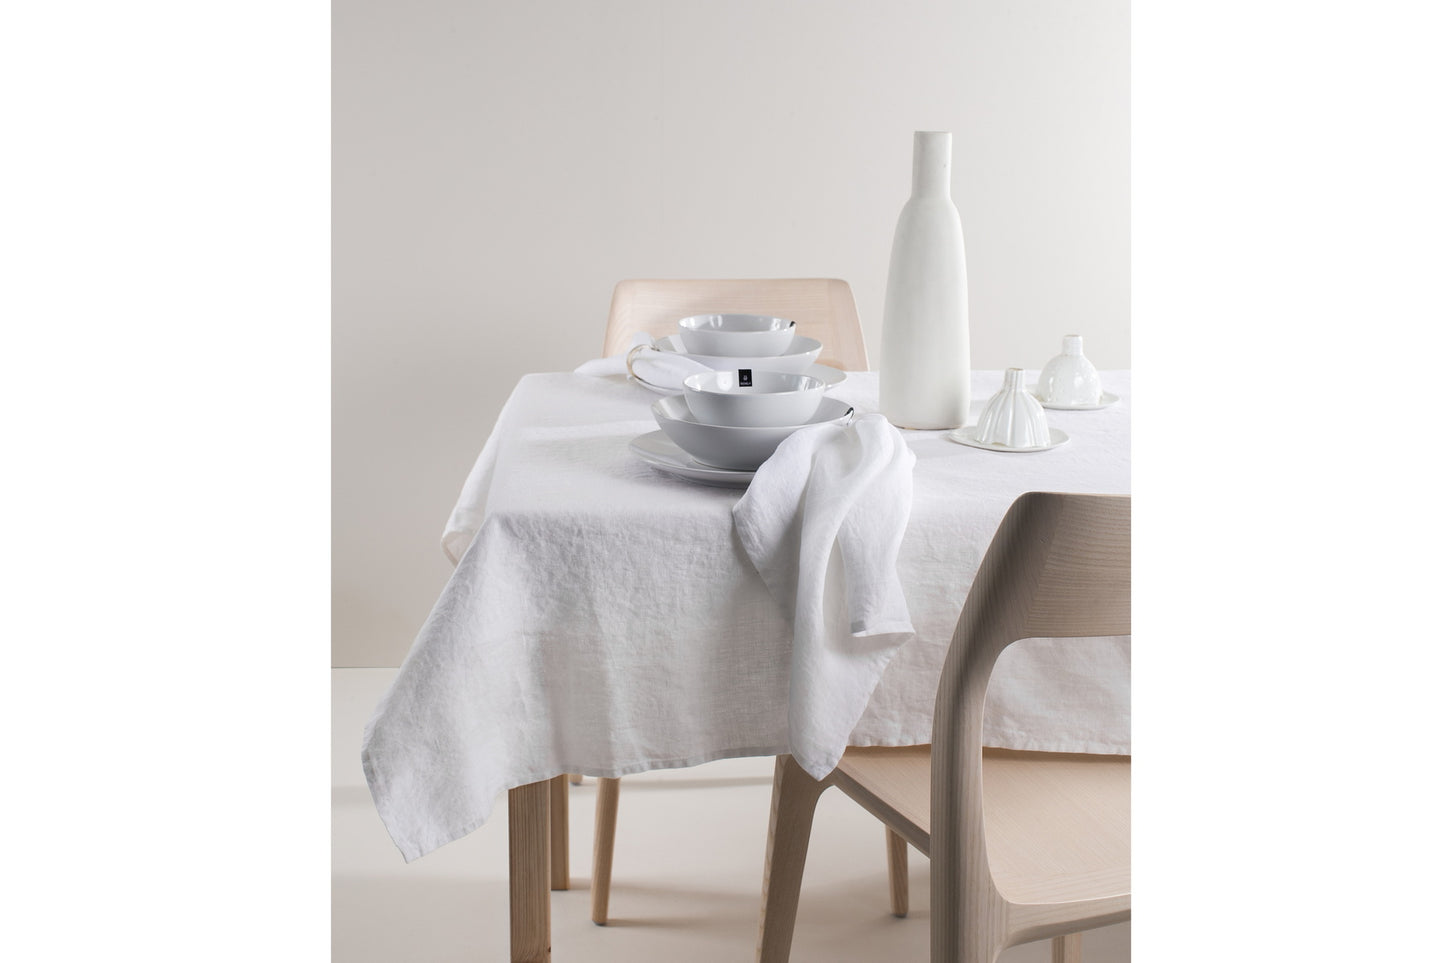 Sunshine, prewashed linen in casual look, tablecloth, white